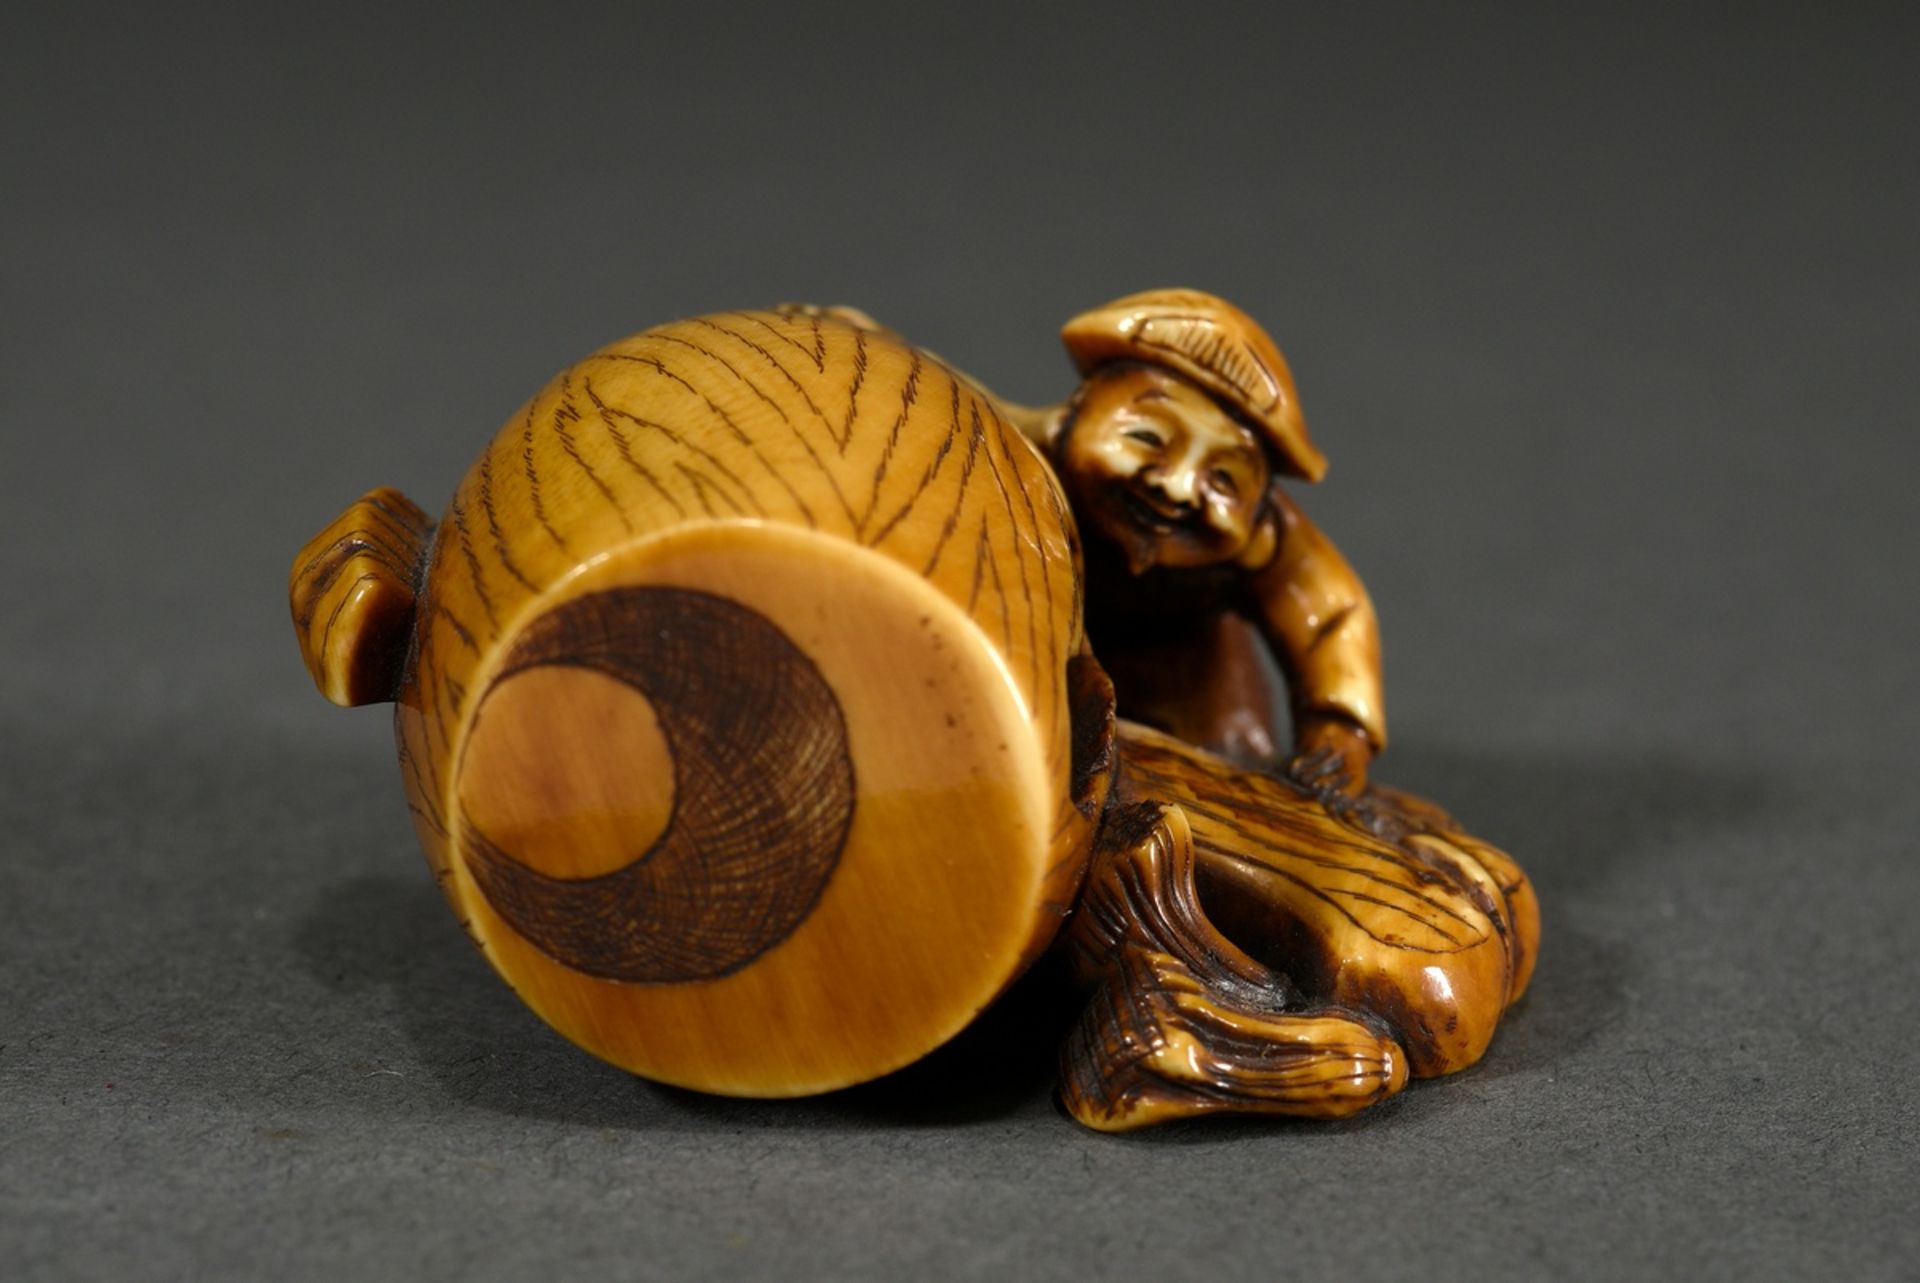 Ivory netsuke "Daikoku with huge rotten lucky hammer", patinated, incised signature, 4x5x2,5cm, per - Image 2 of 7